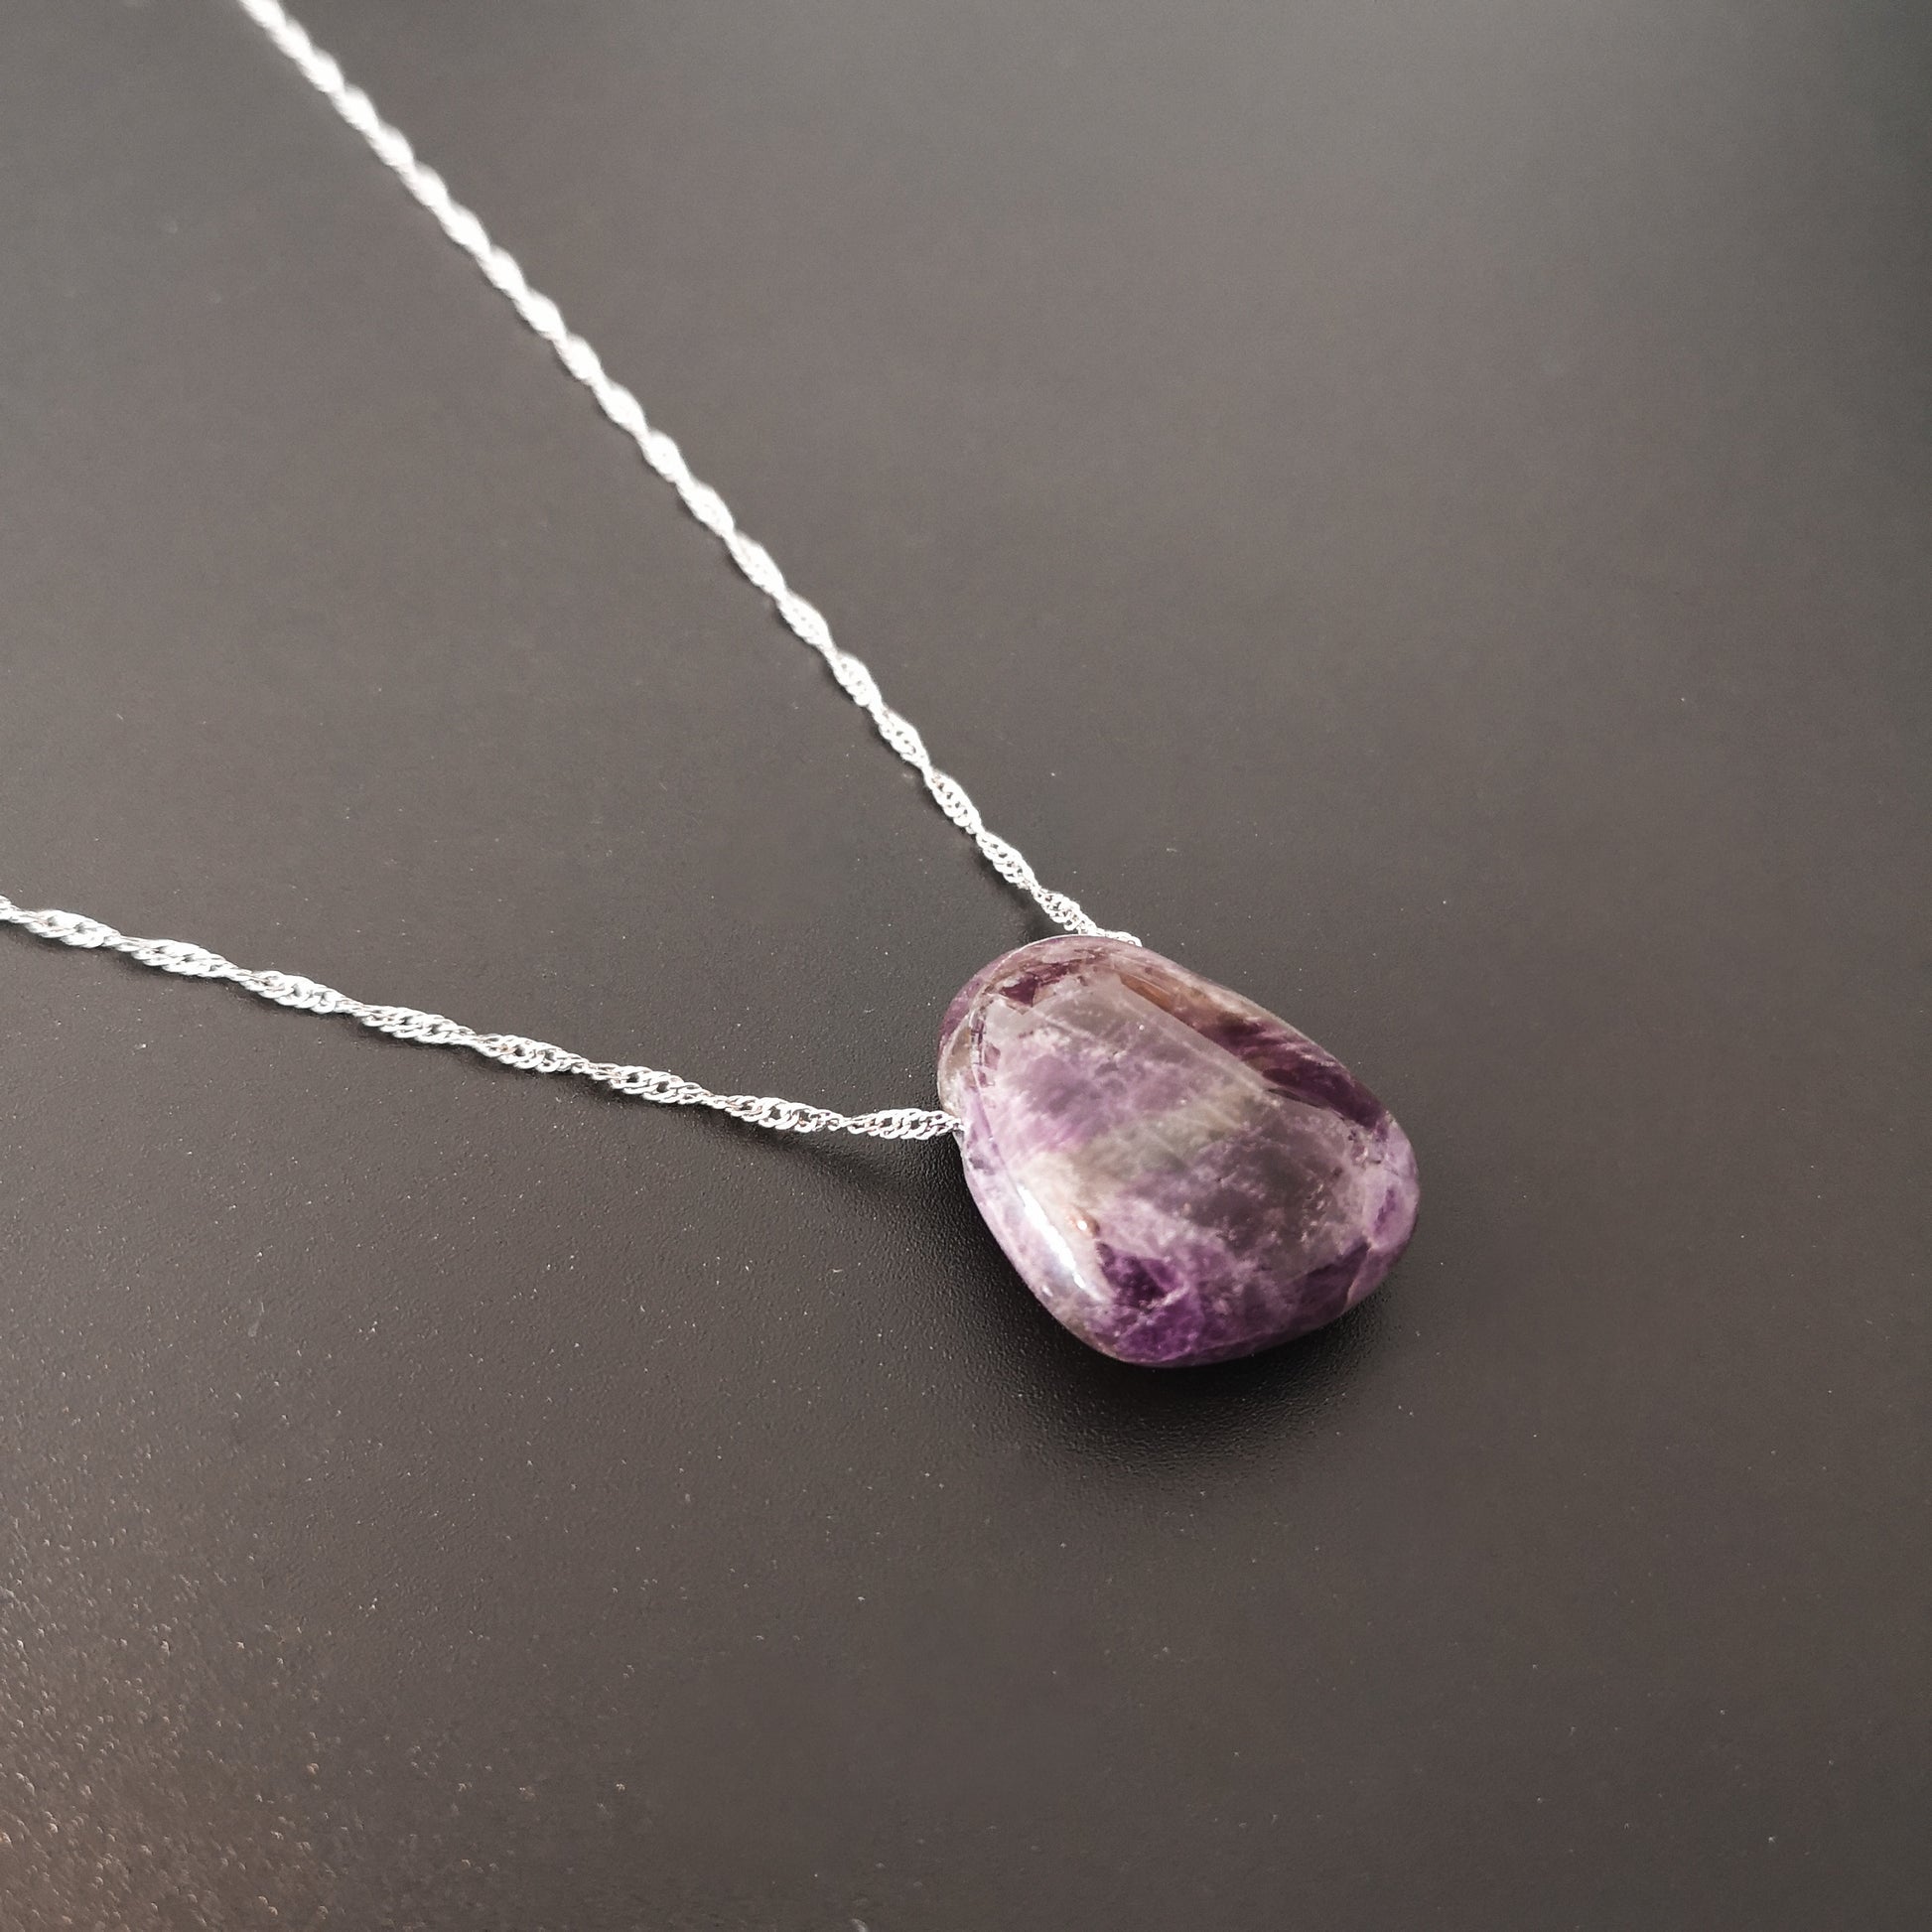 Amethyst gemstone lithotherapy necklace - The French Witch shop